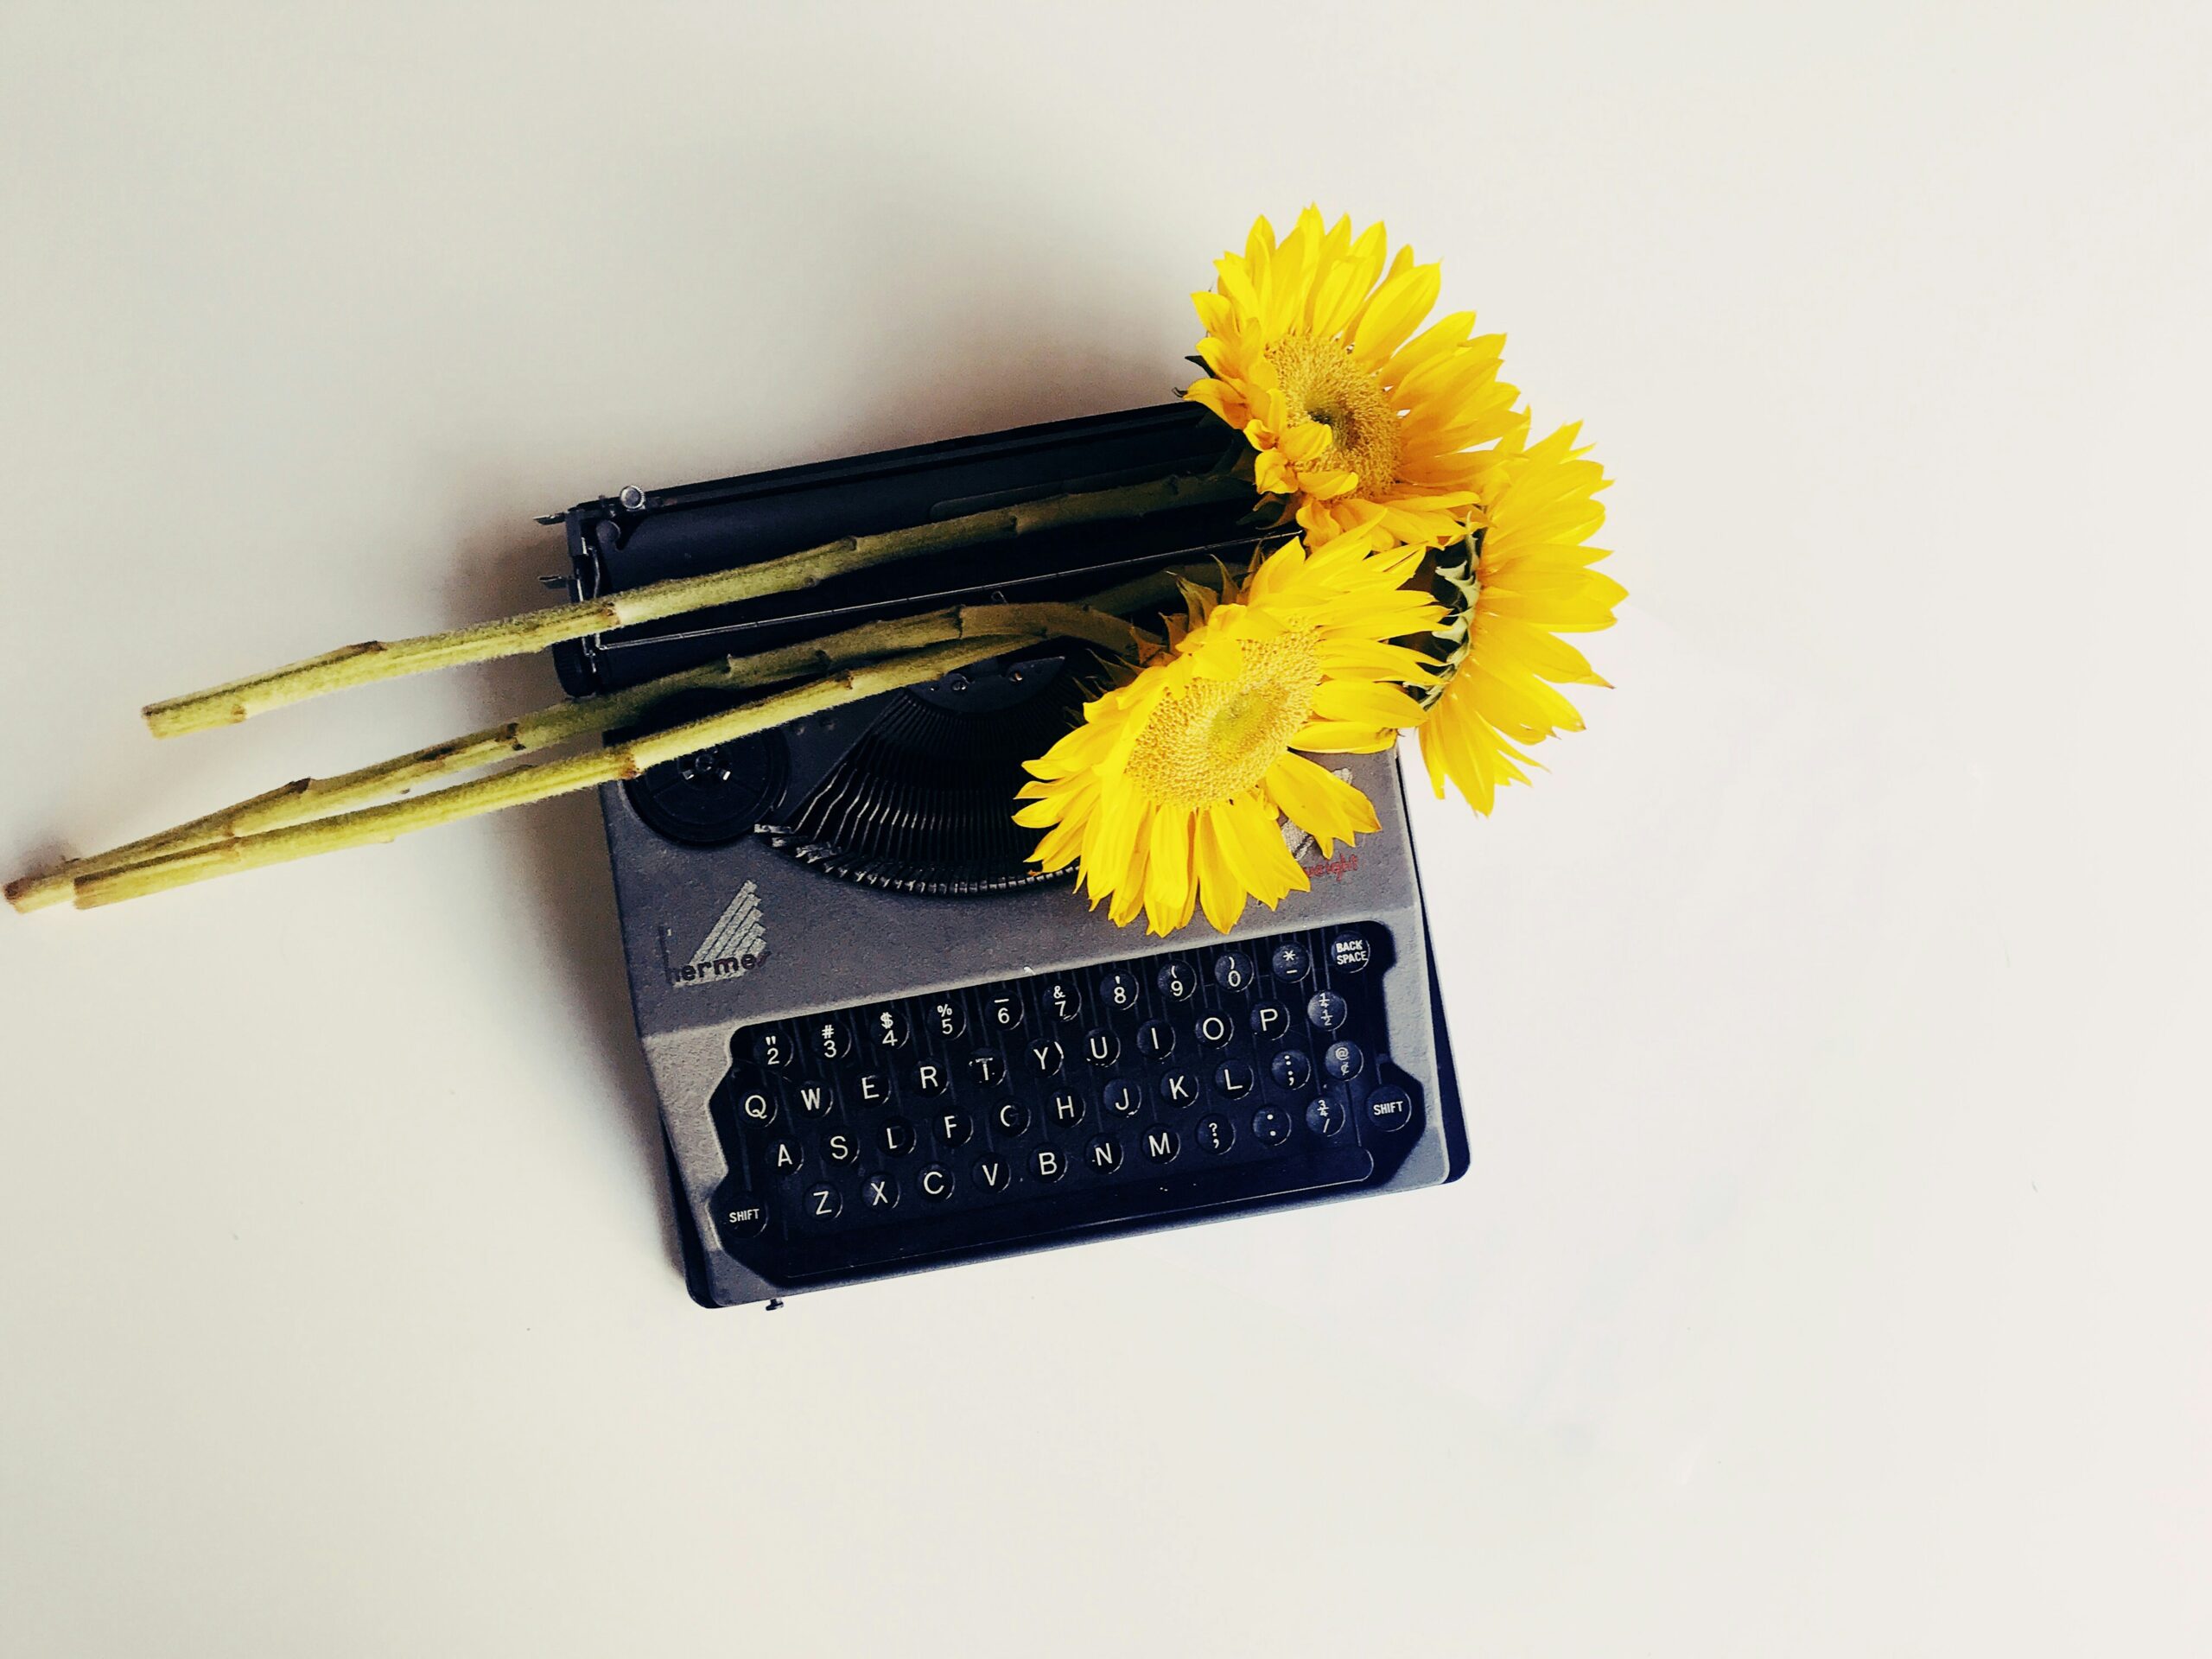 Black typewriter on a white background, with 2 sunflowers on top of the typewriter.